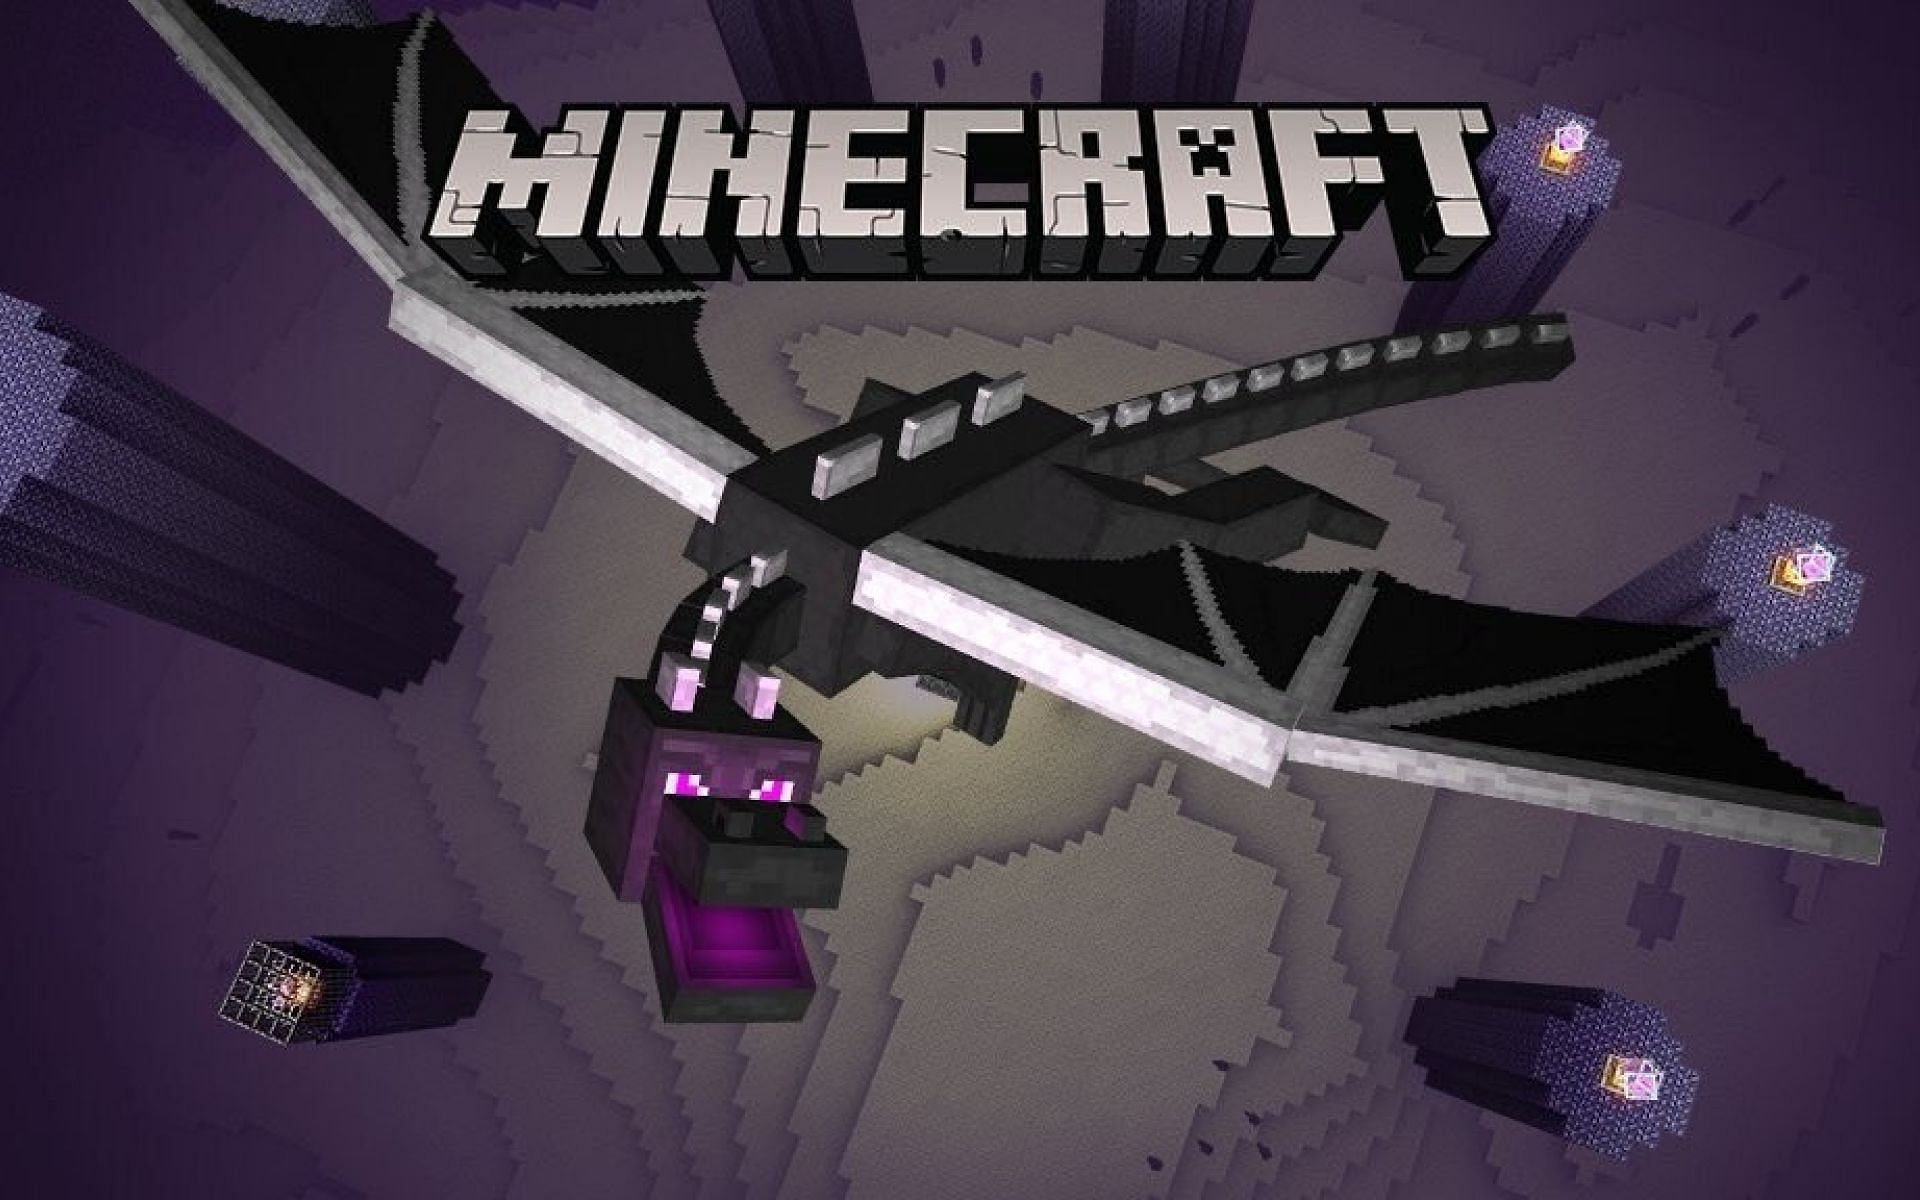 Promotional art featuring the Ender Dragon. (Image via Minecraft)